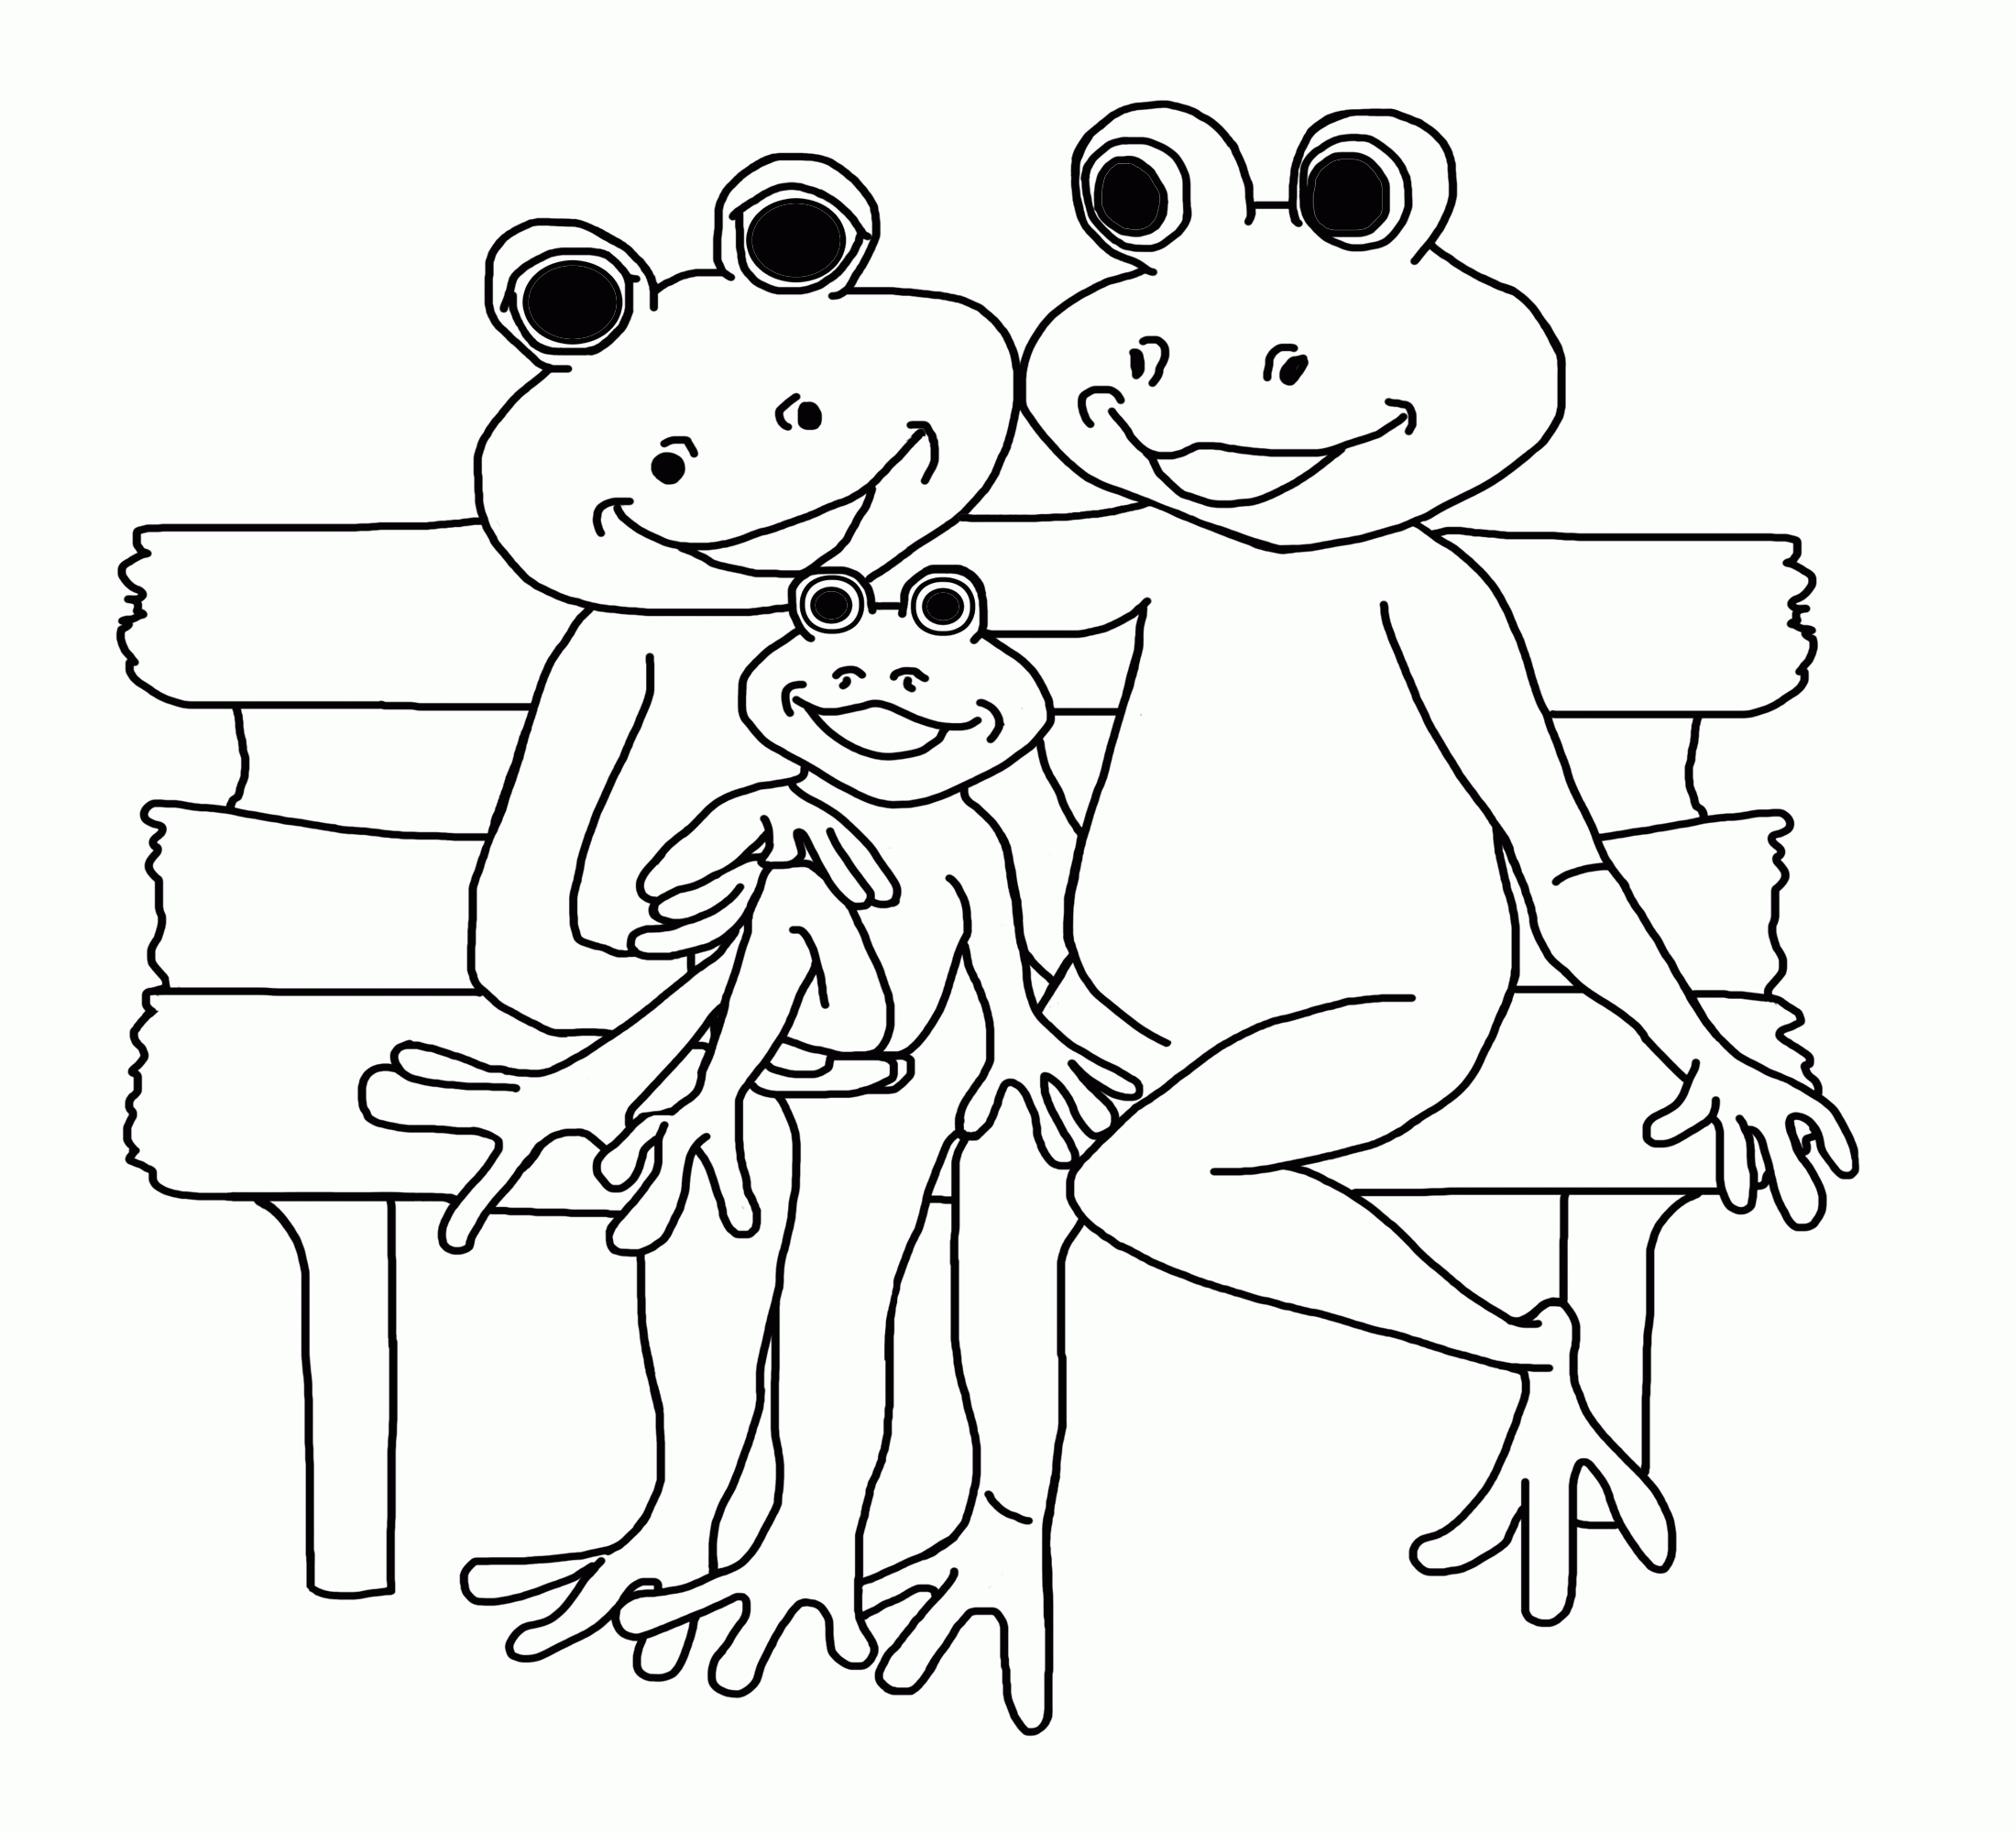 7 Pics of Frog Mom Coloring Pages - Frog Family Coloring Pages ...